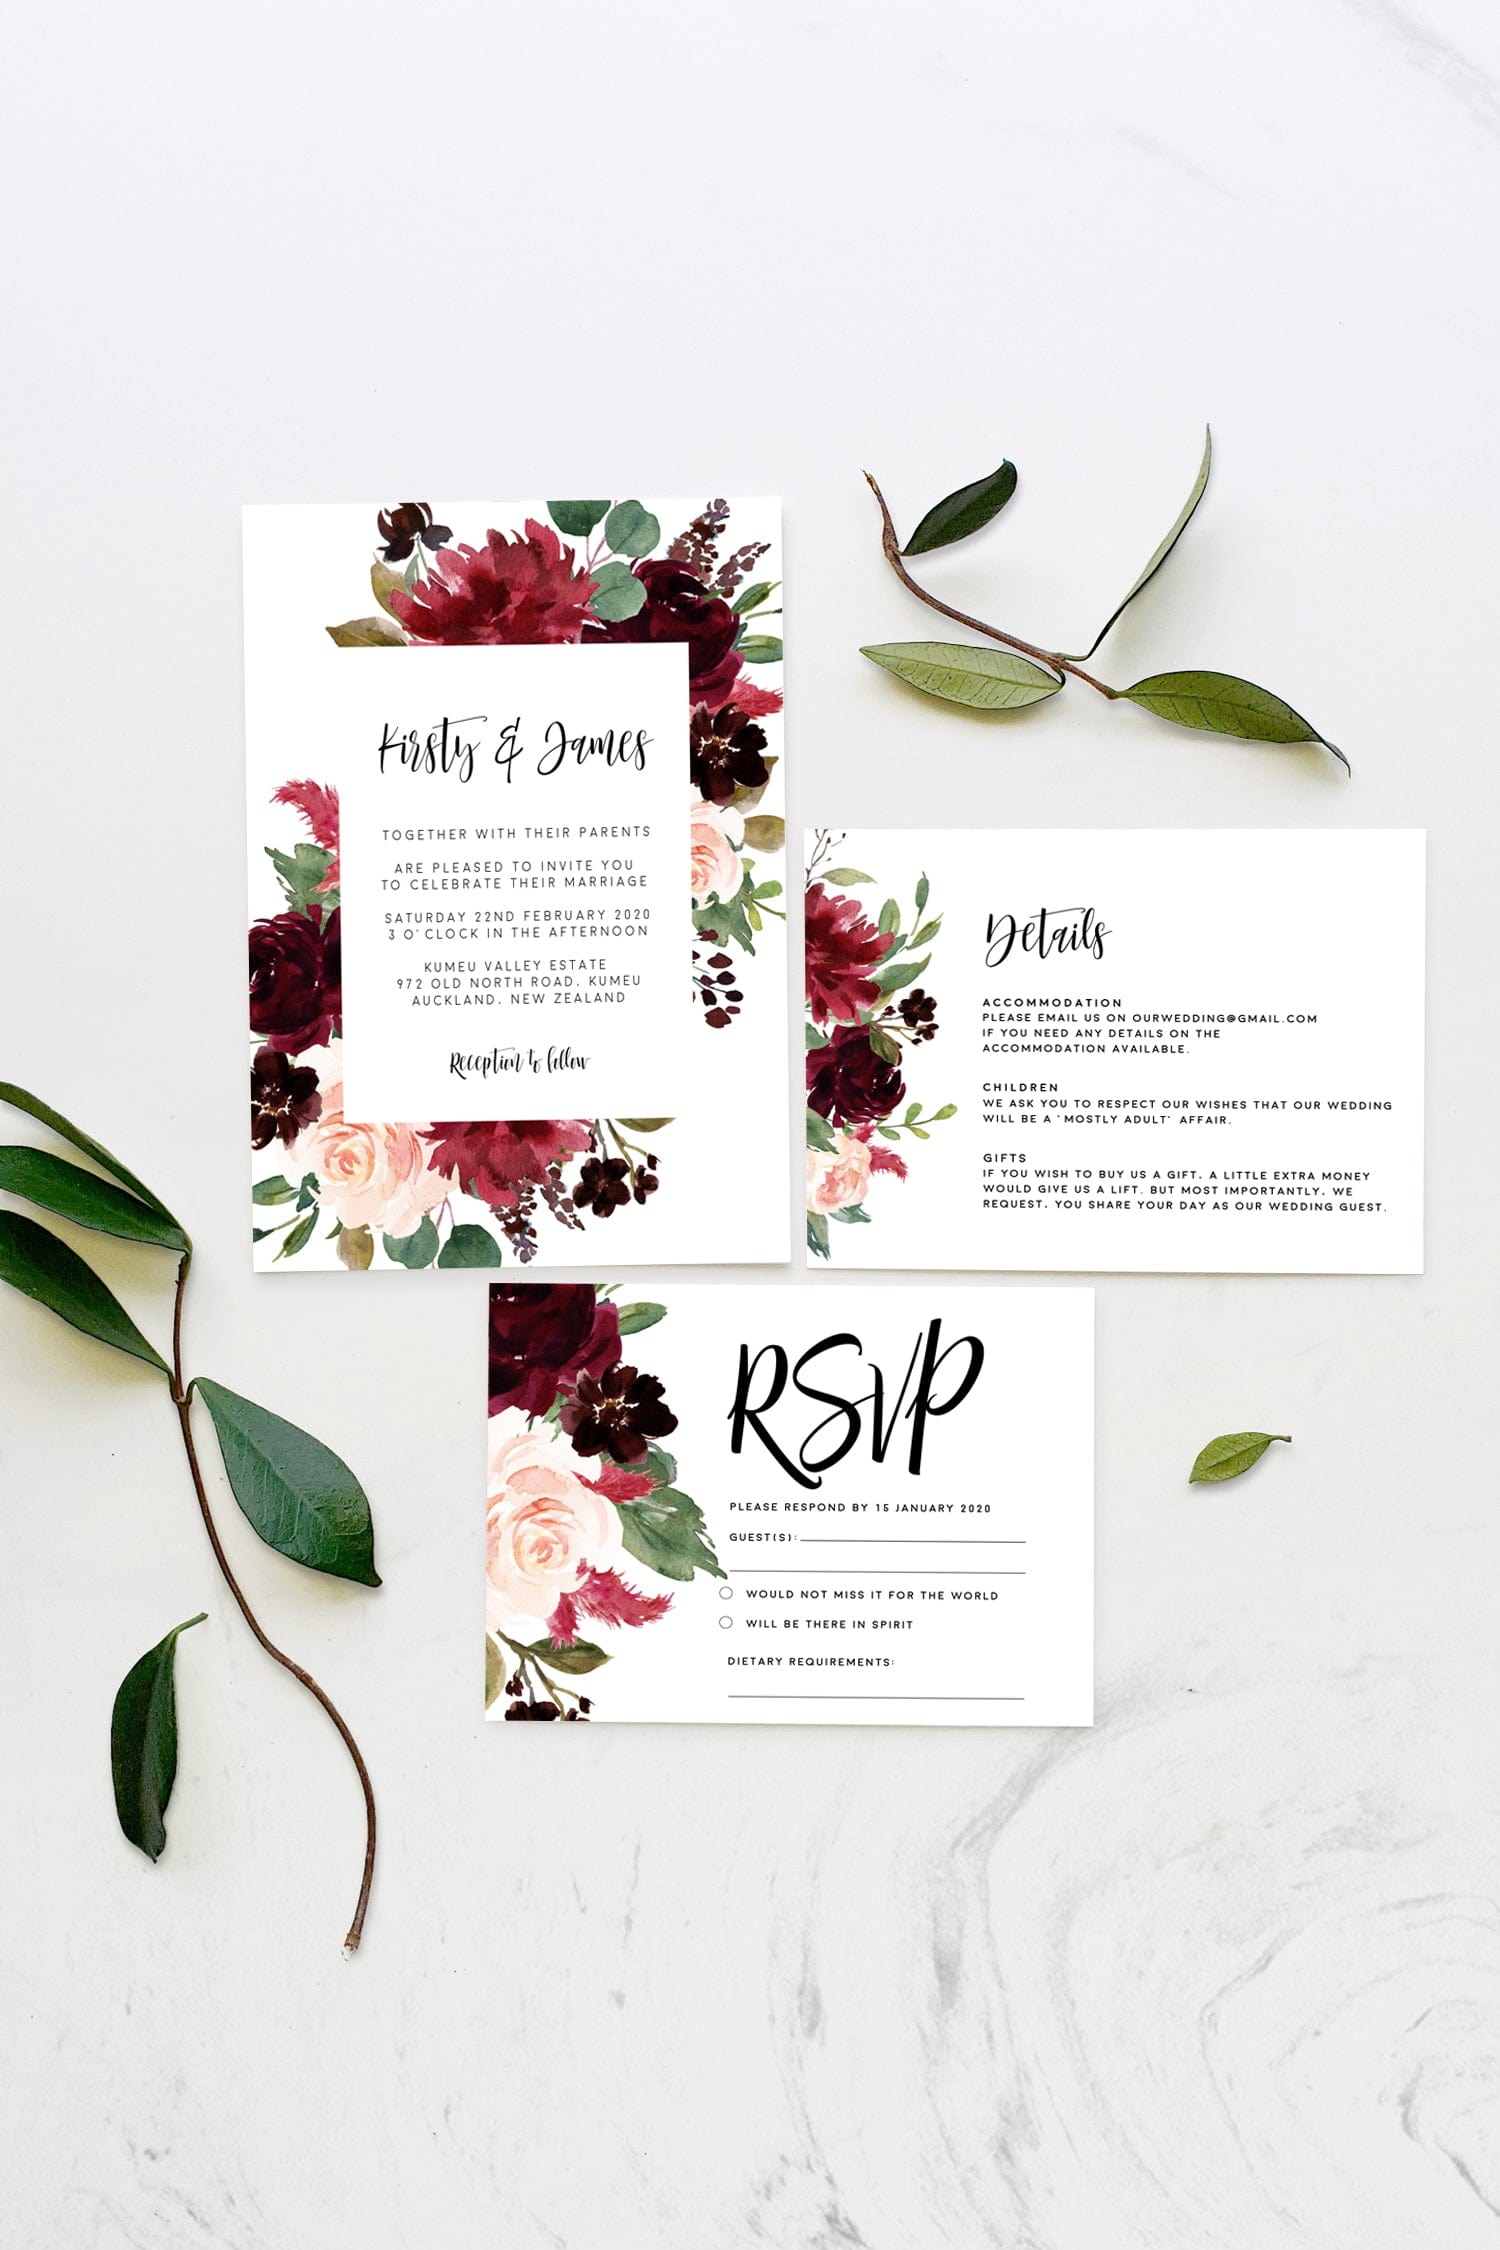 Burgundy Discount Card Stock Paper for DIY invitations and